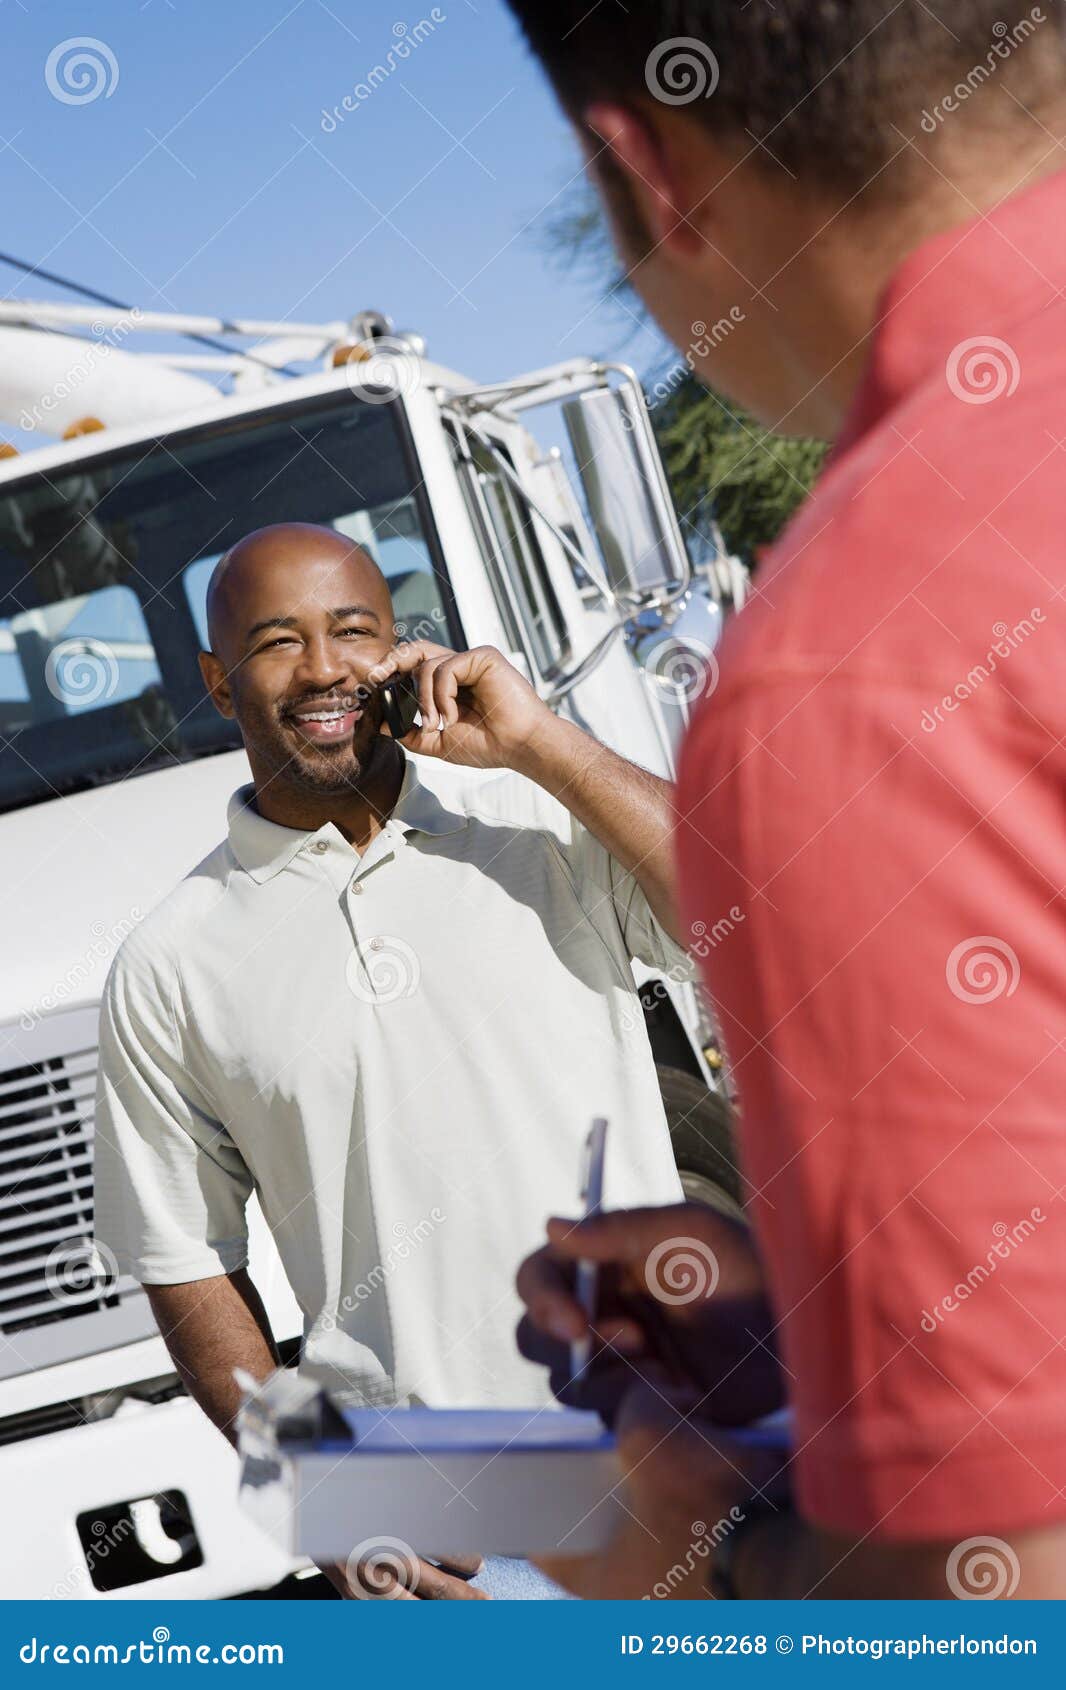 truck driver with his coworker